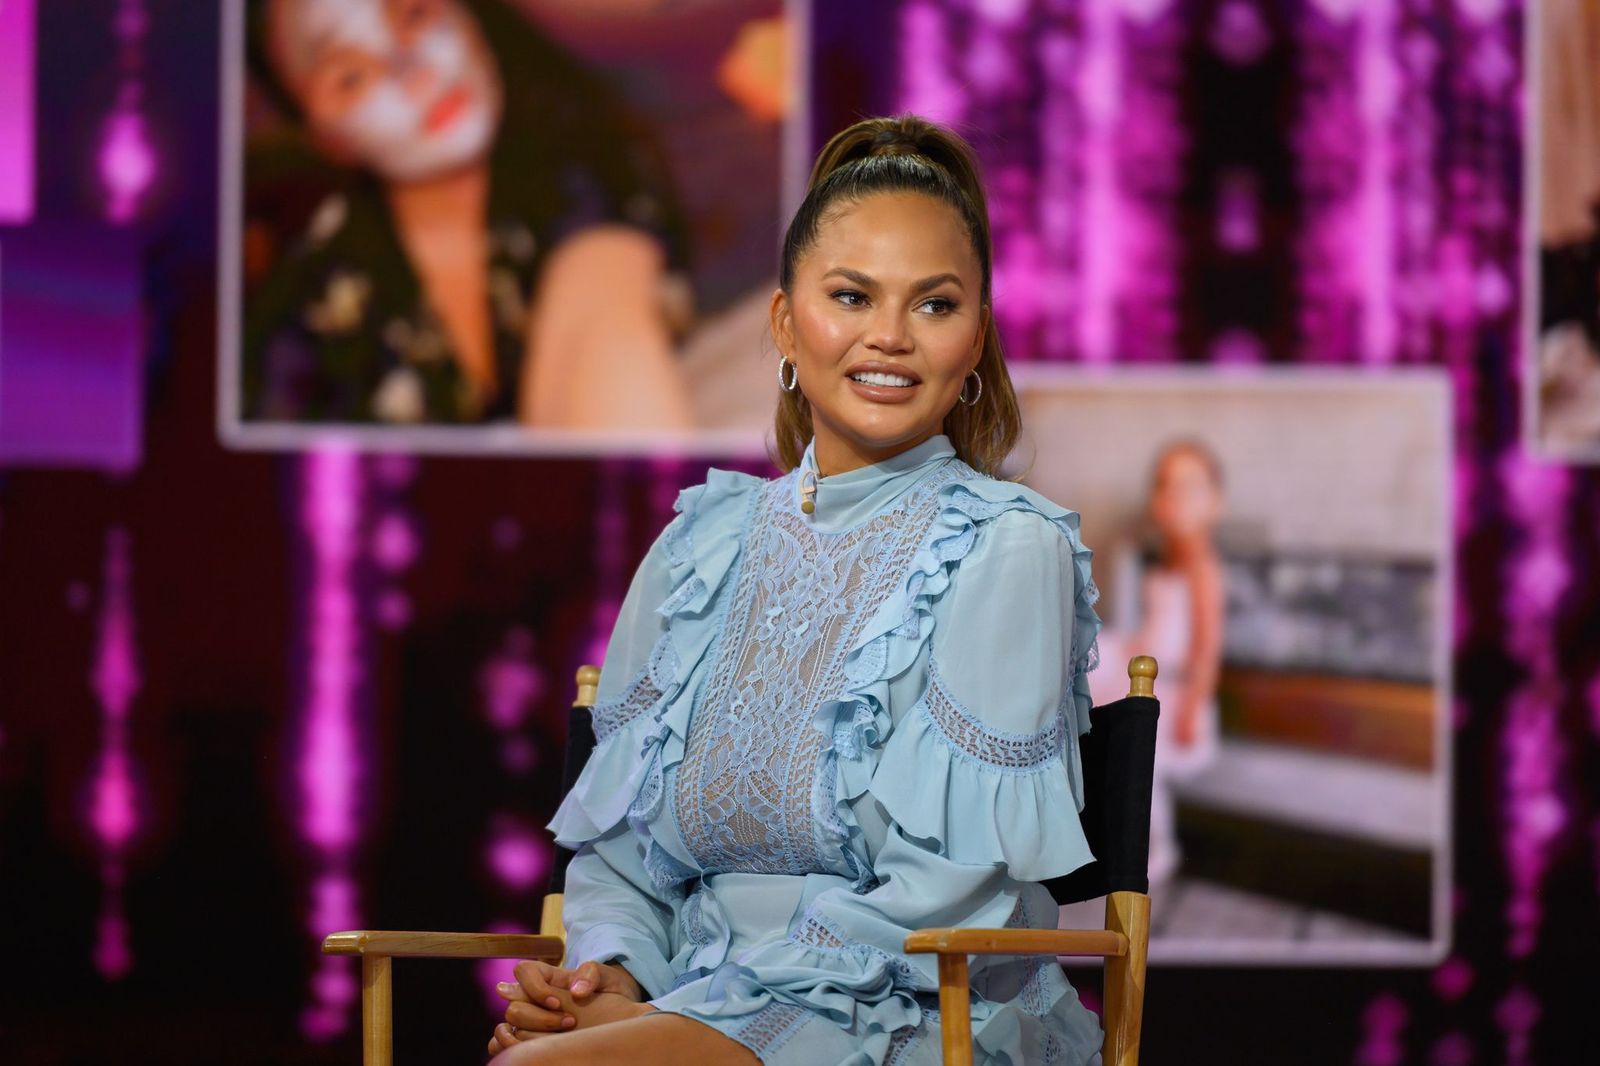 Chrissy Teigen on the set of the "Today" show on February 19, 2020 | Photo: Nathan Congleton/NBC/NBCU Photo Bank/Getty Images